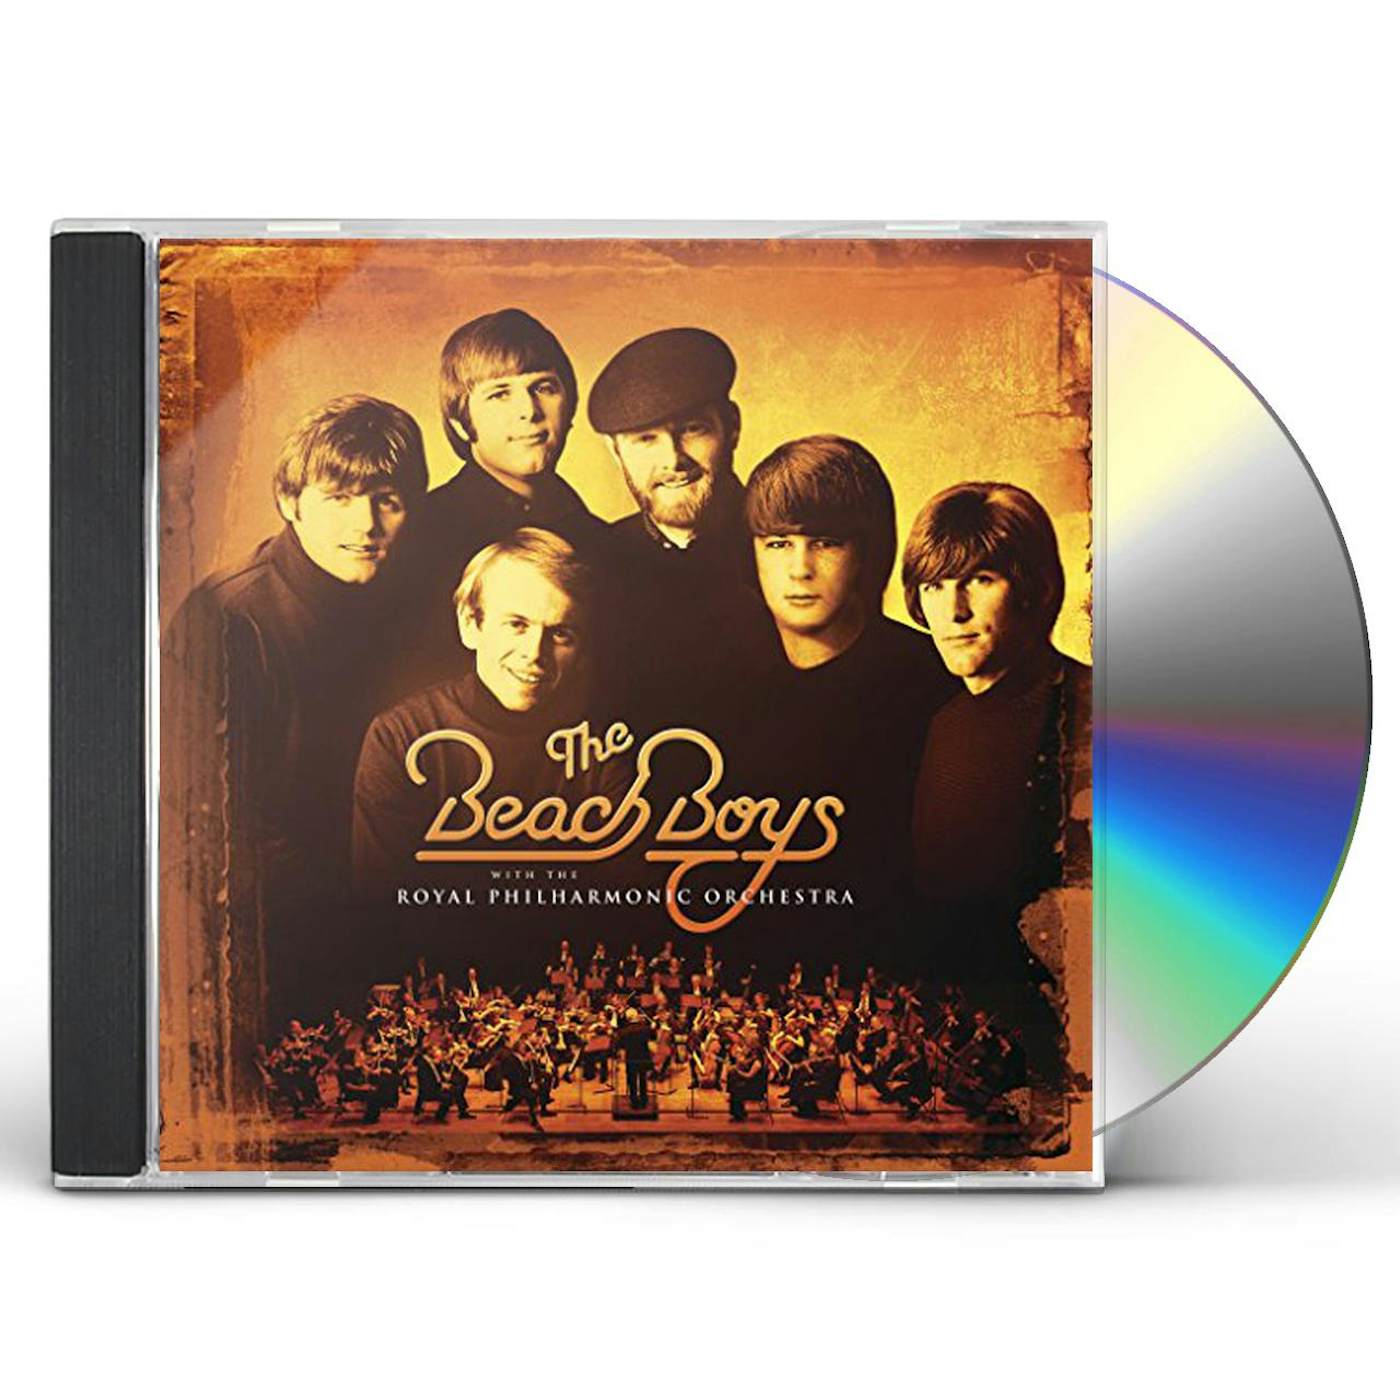 The Beach Boys WITH THE ROYAL PHILHARMONIC ORCHESTRA CD